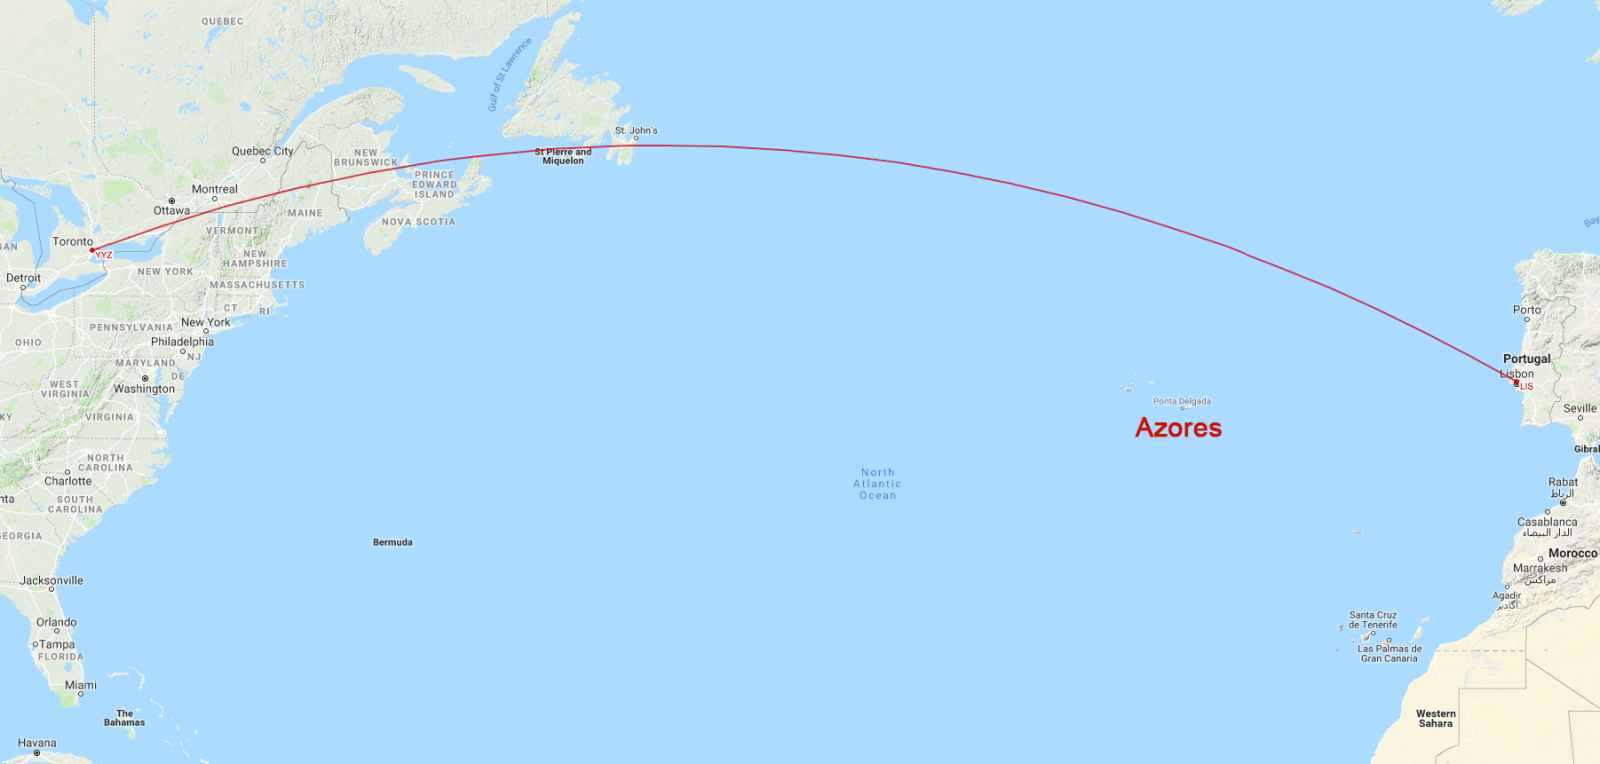 The planned route for Air Transat Flight 236